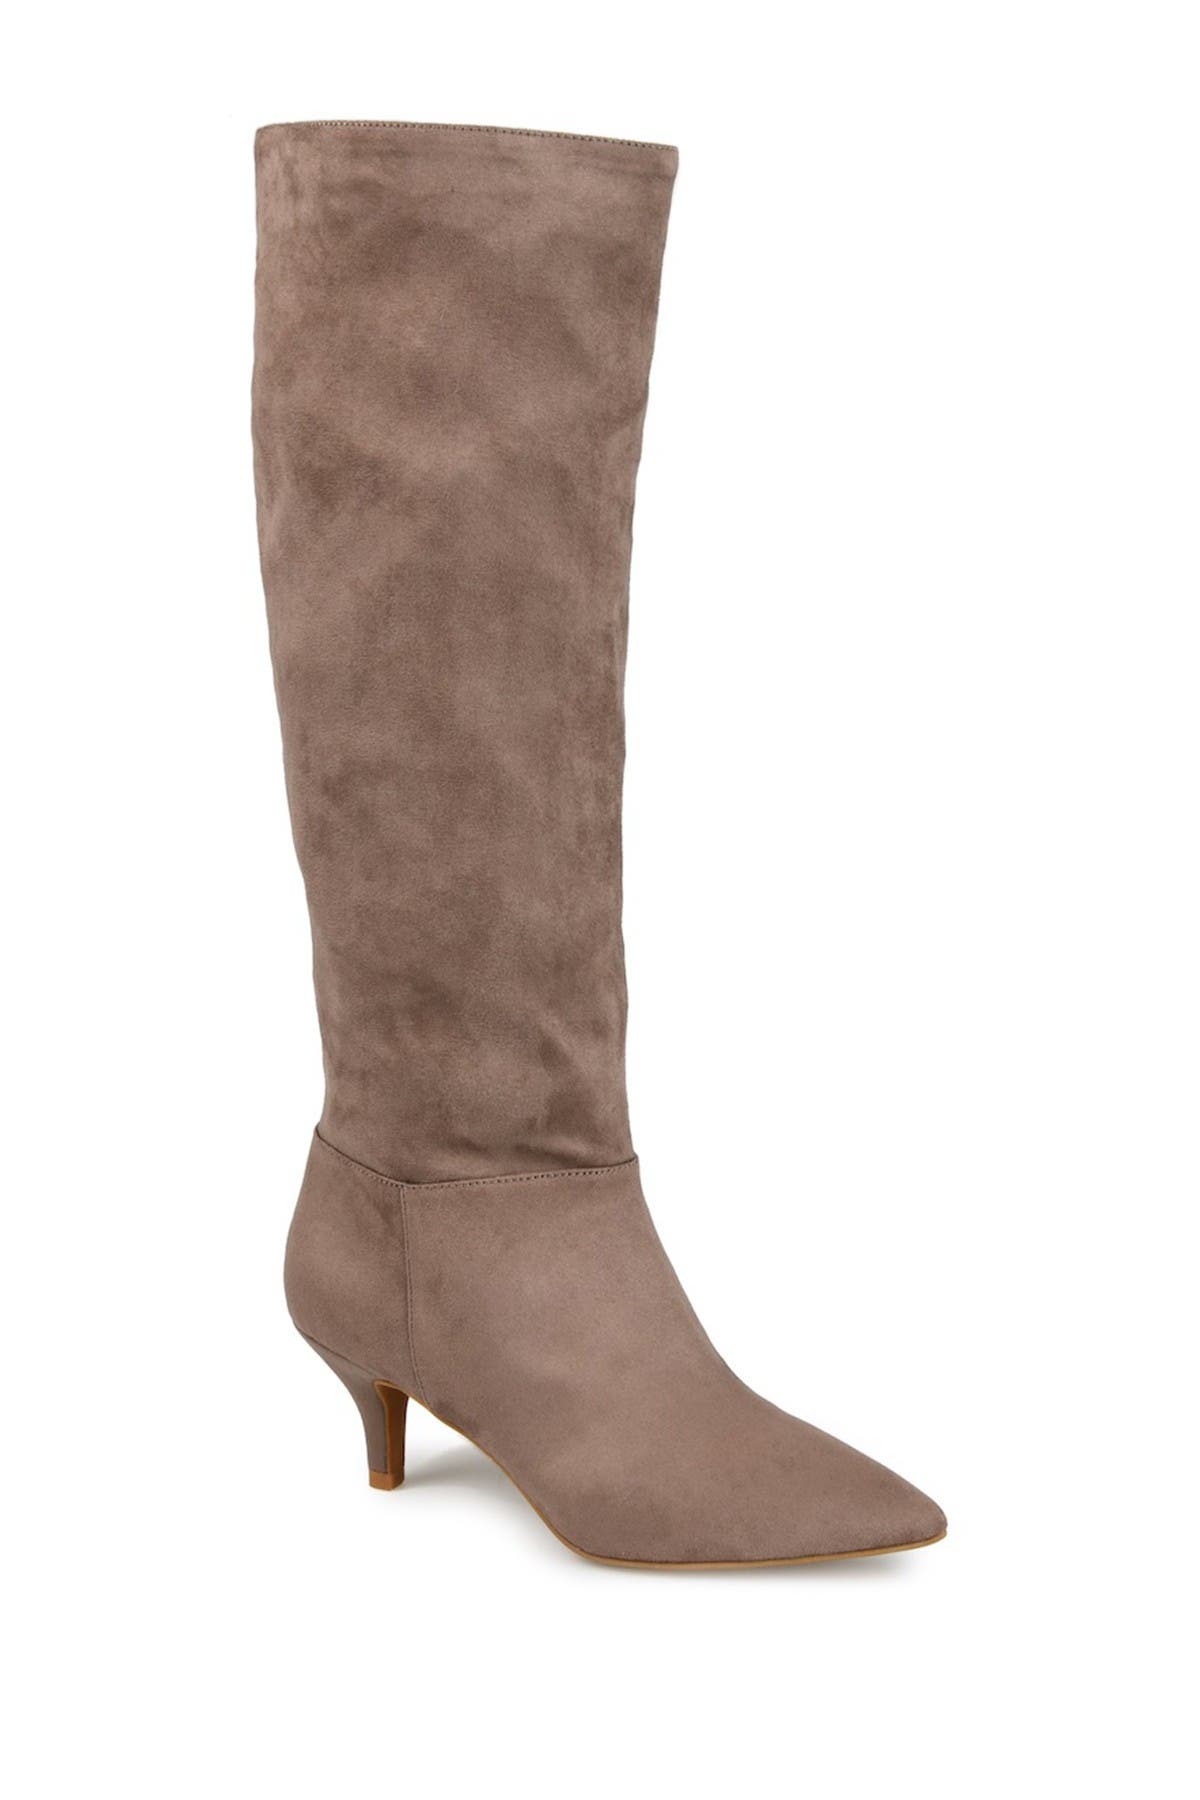 extra wide suede boots